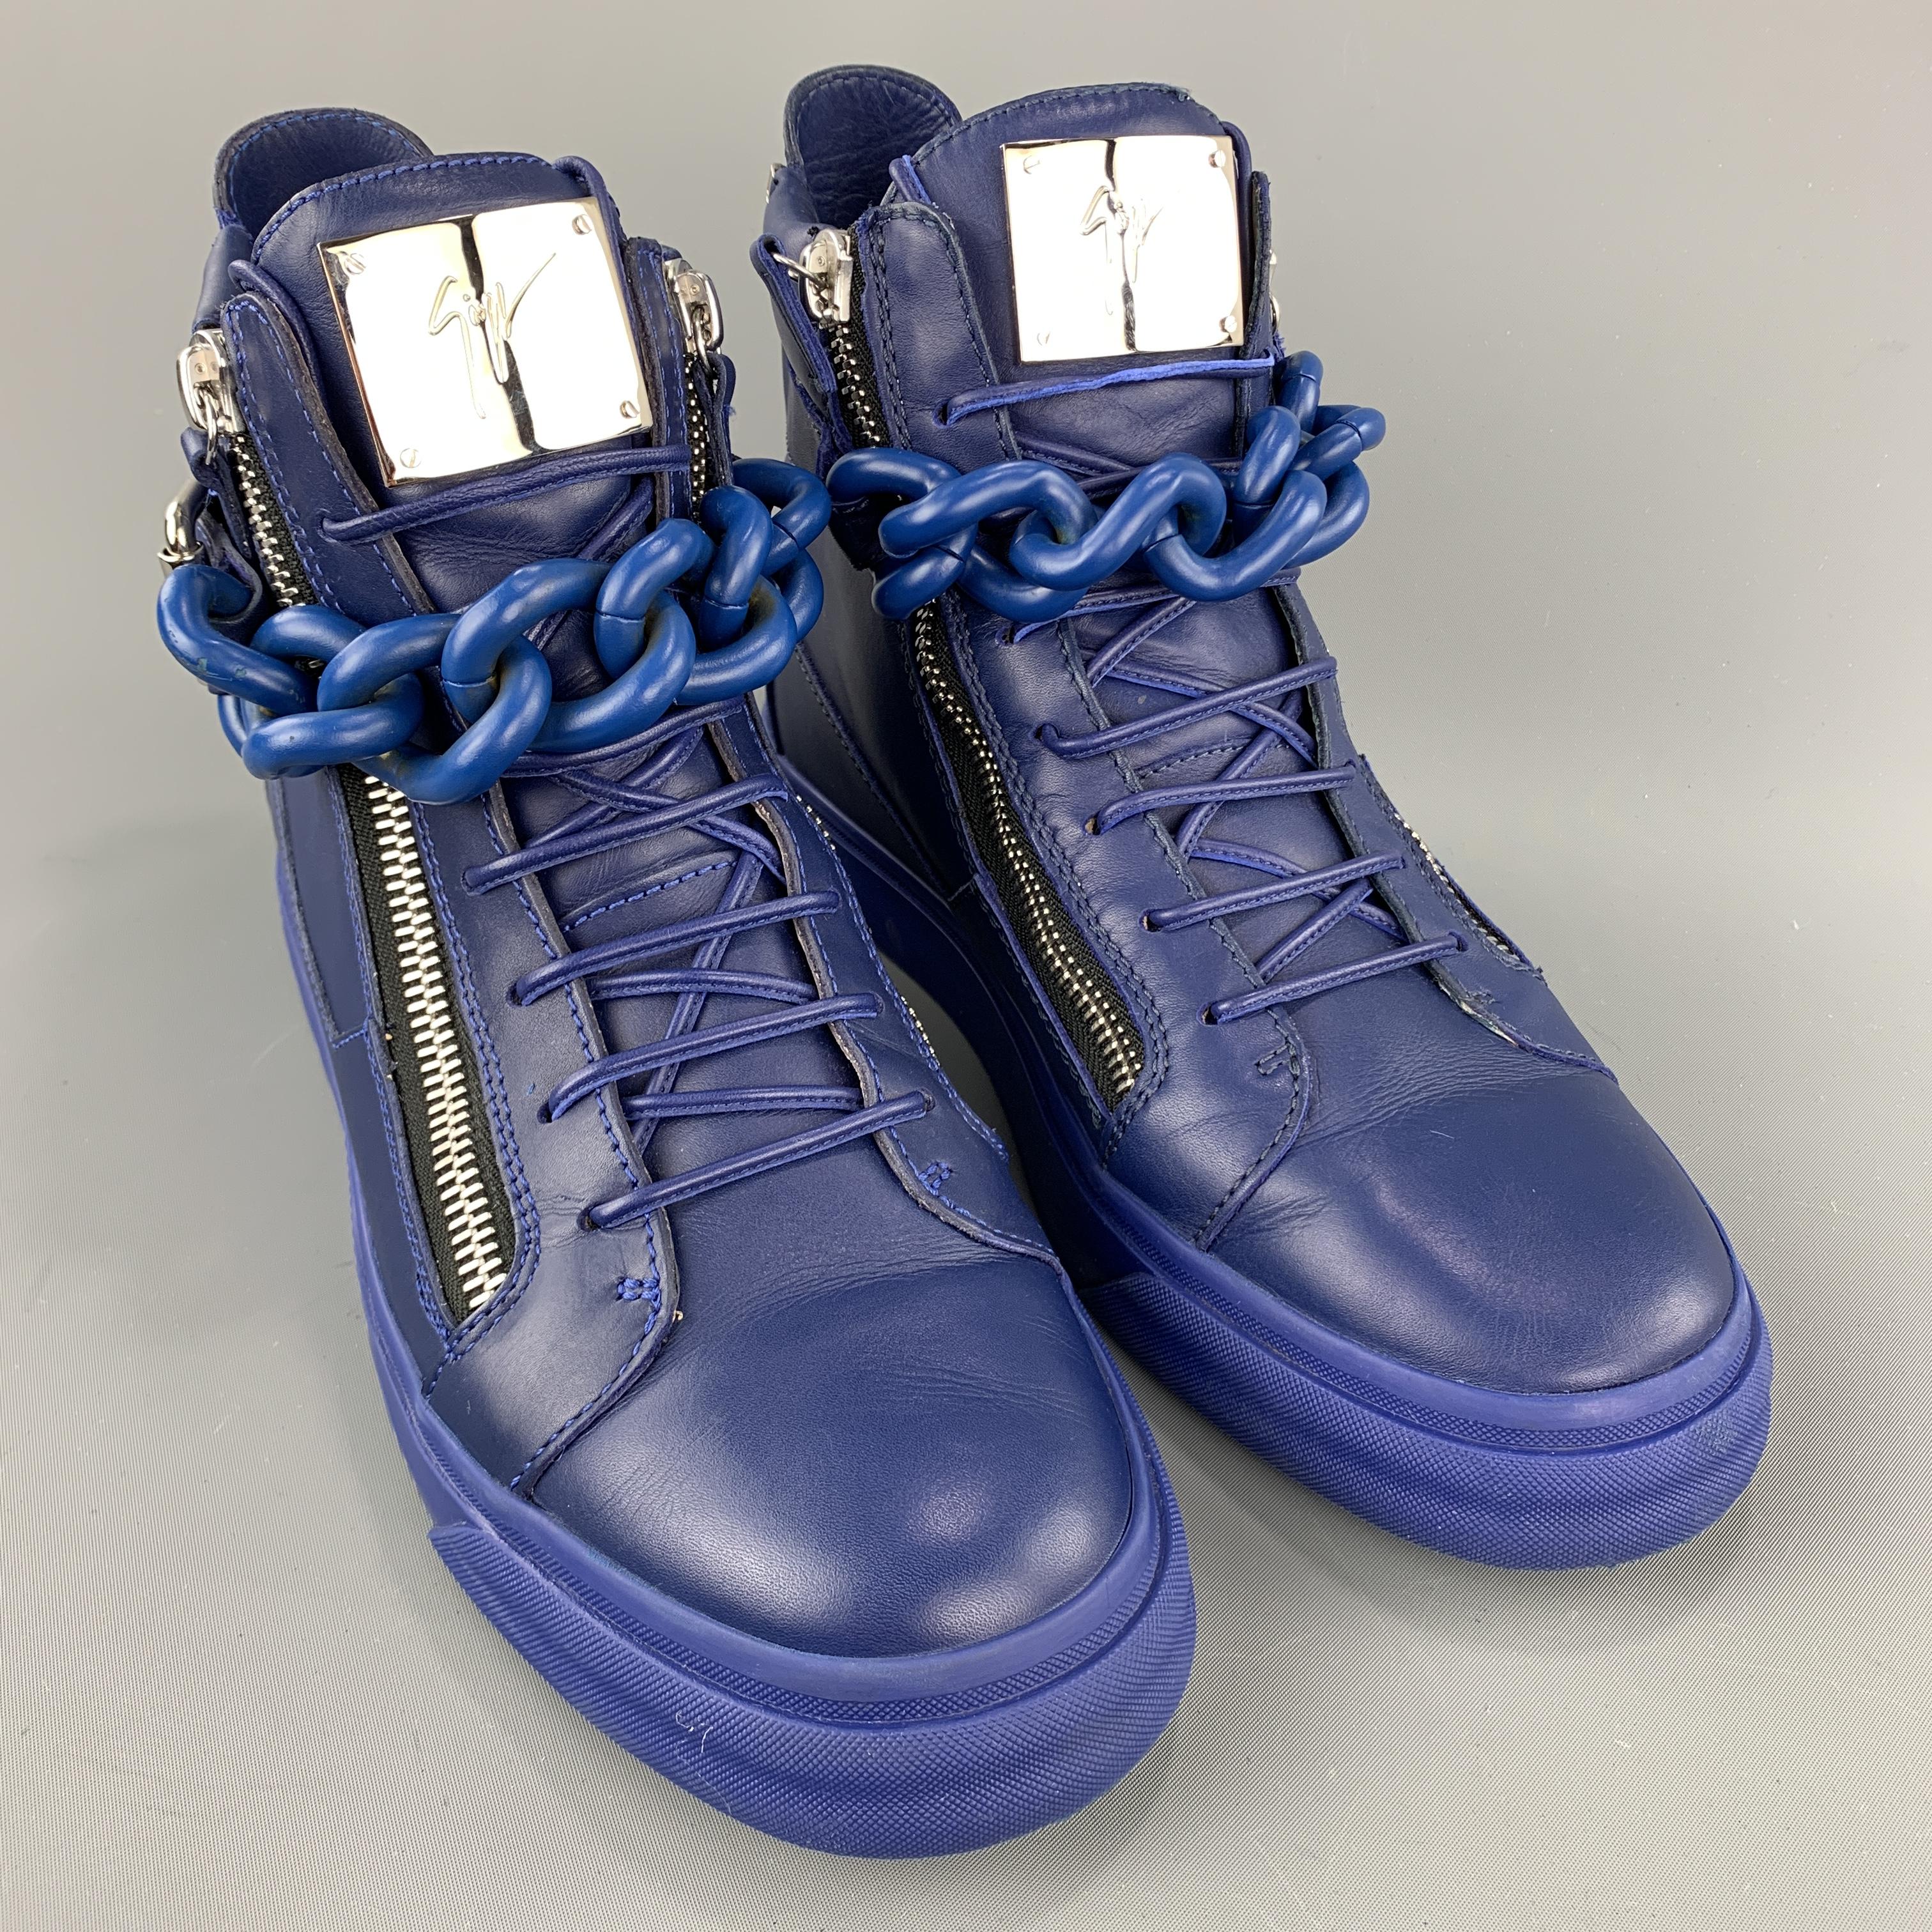 GIUSEPPE ZANOTTI sneakers comes in a blue leather featuring a high top style, zipper details, chunky chain, and a rubber sole. Made in Italy. Comes with box.
 

Very Good Pre-Owned Condition.
Marked: 43

Outsole: 4 in. x 12 in. 